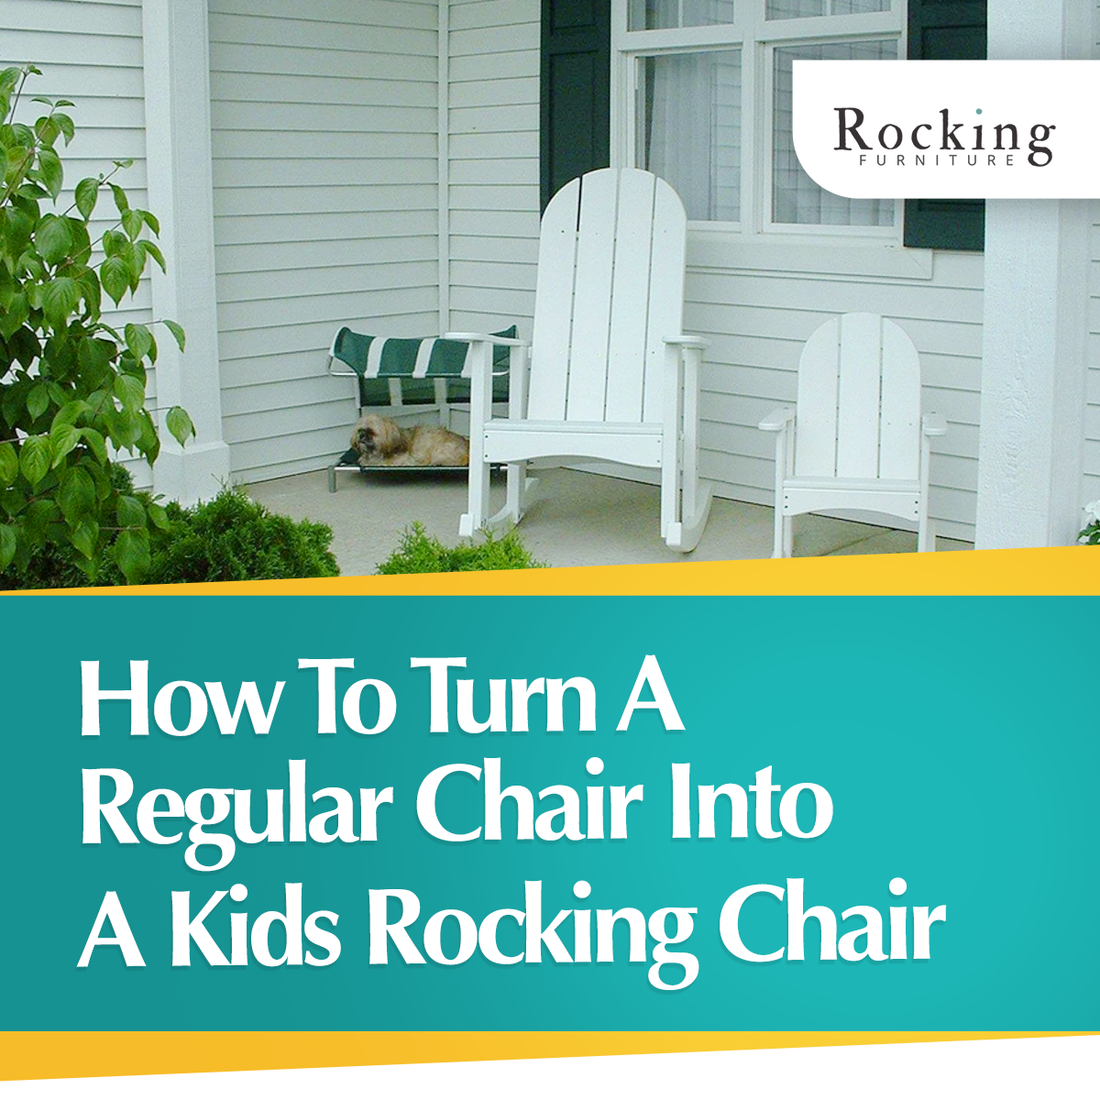 How To Turn A Regular Chair Into A Kids Rocking Chair